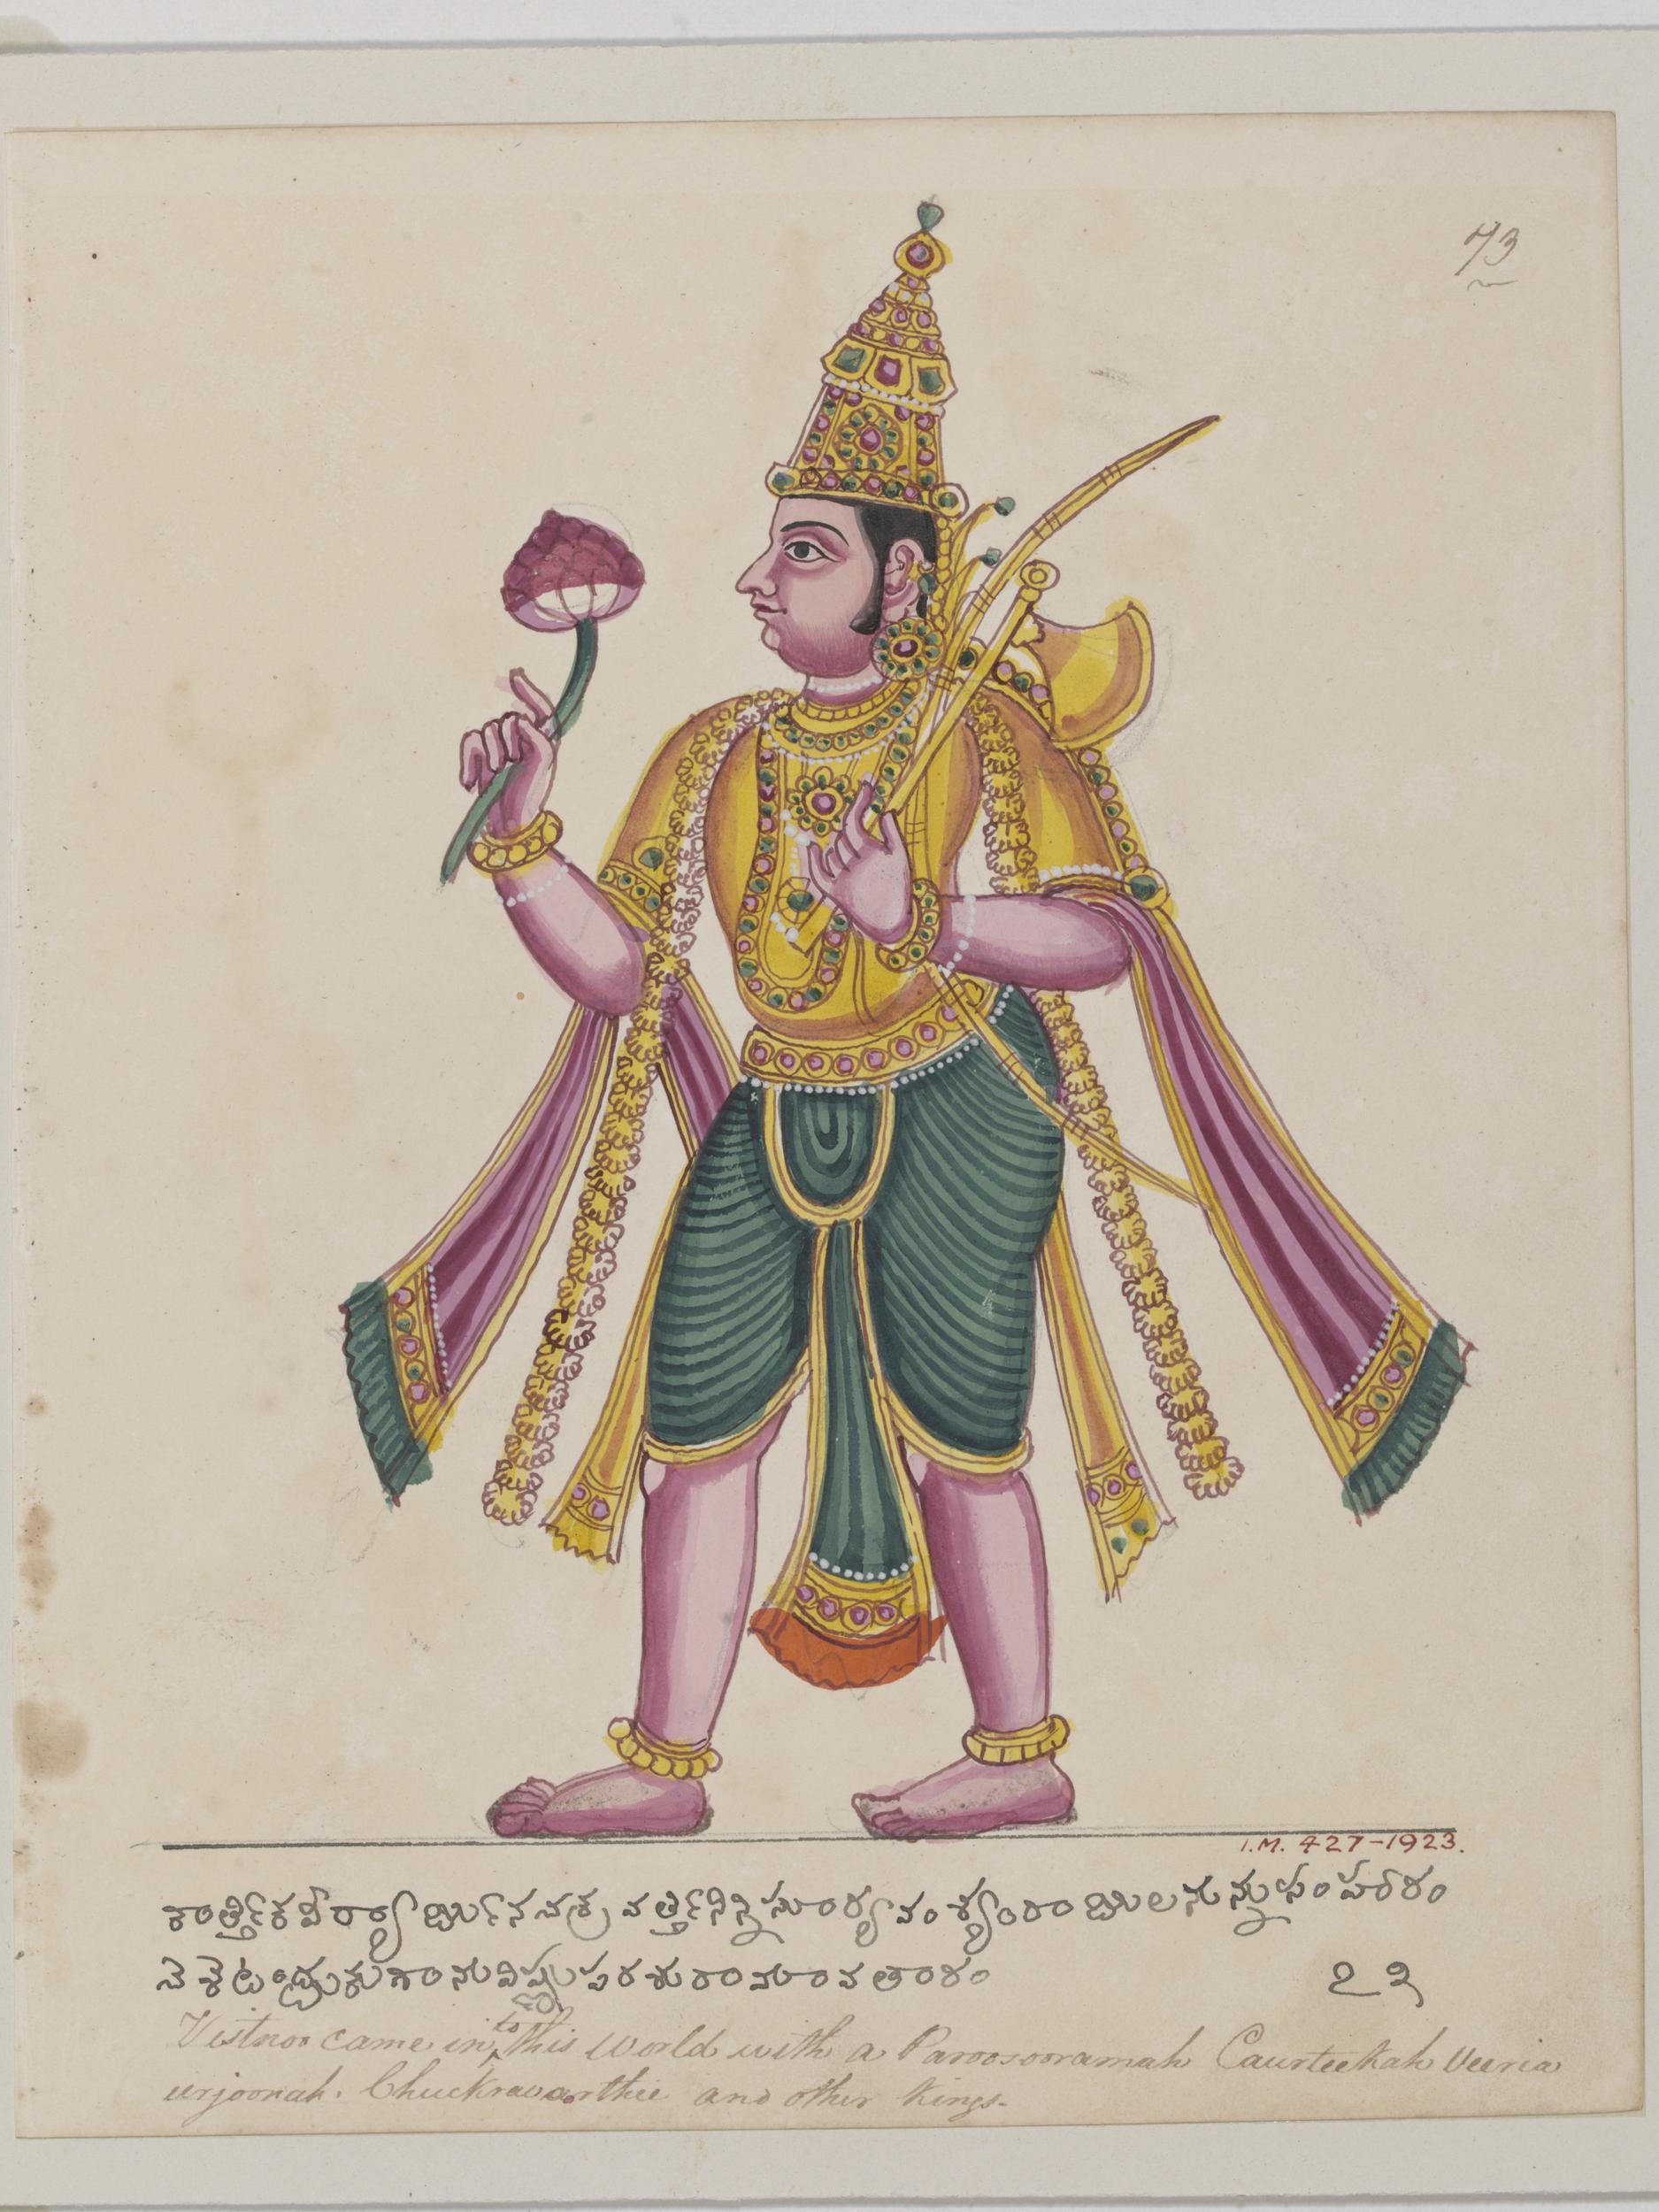 Parashurama Holding an Axe and a Lotus Bud by Unknown Artist - c. 1825 - 22 x 18 cm Victoria and Albert Museum